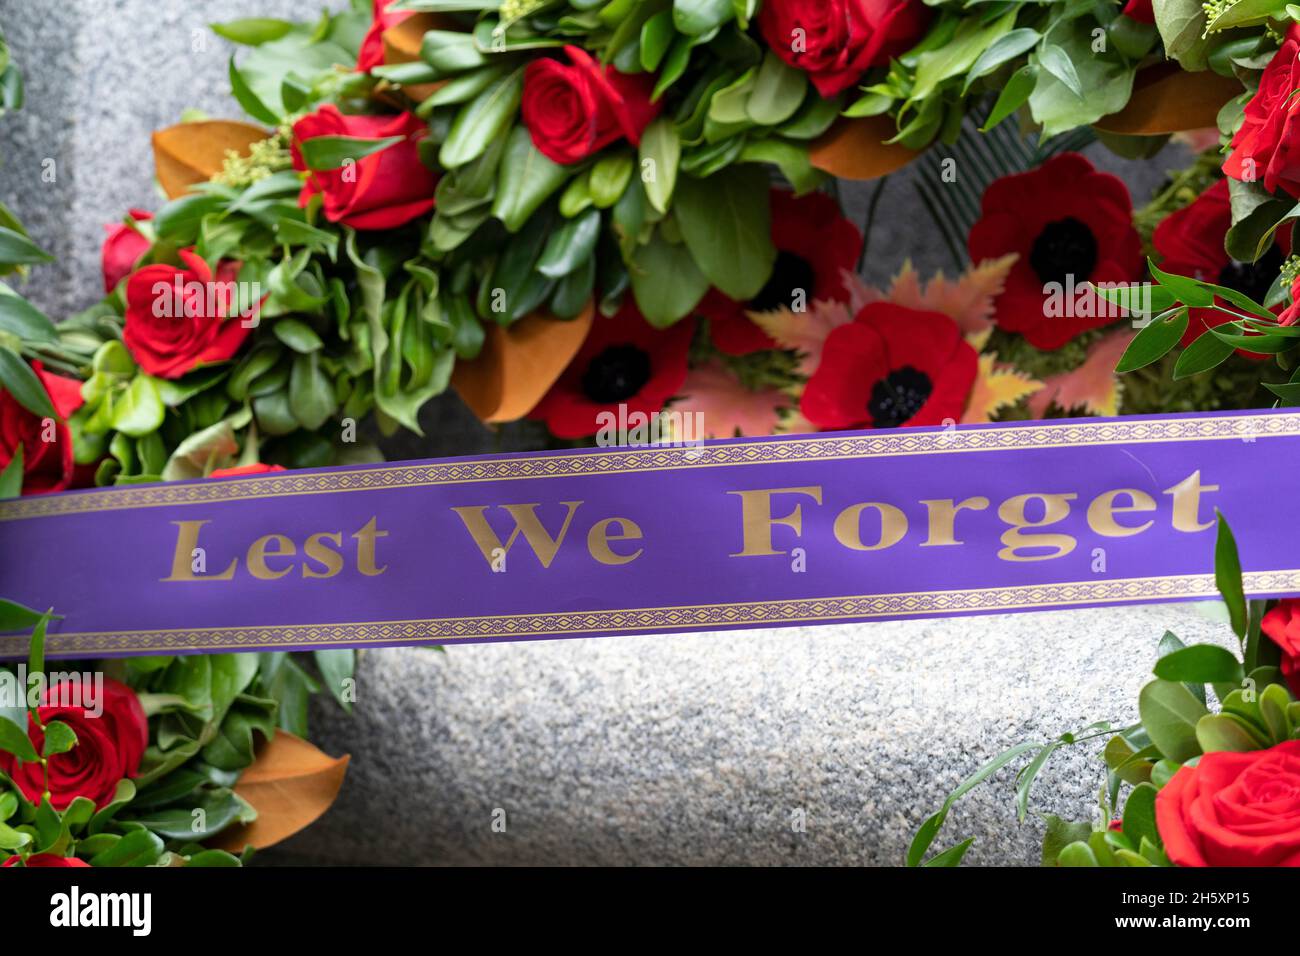 Remembrance Day Canada, Lest We Forget, Wreath, Poppies Stock Photo